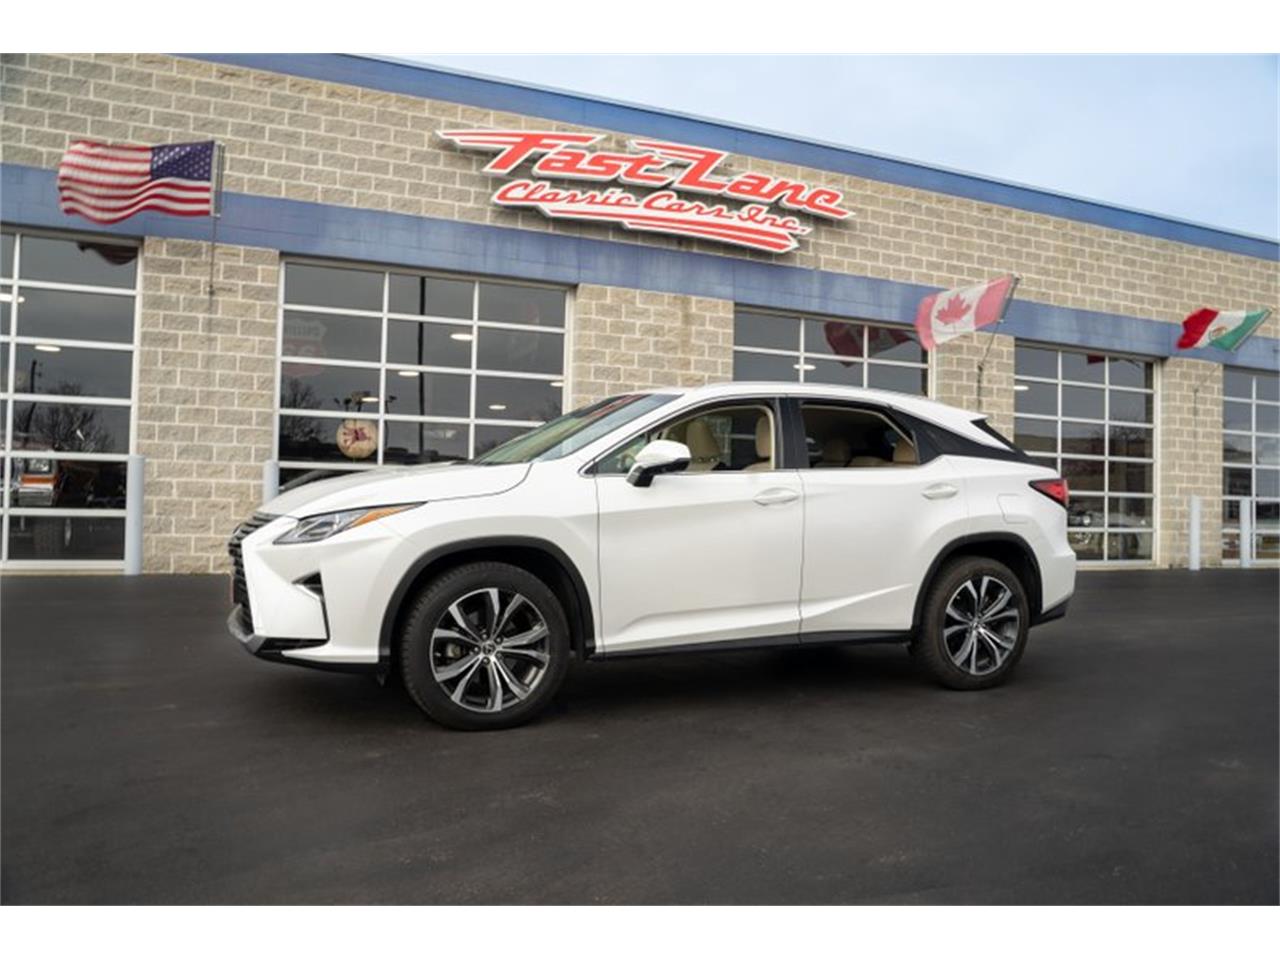 2019 Lexus RX350 for sale in St. Charles, MO